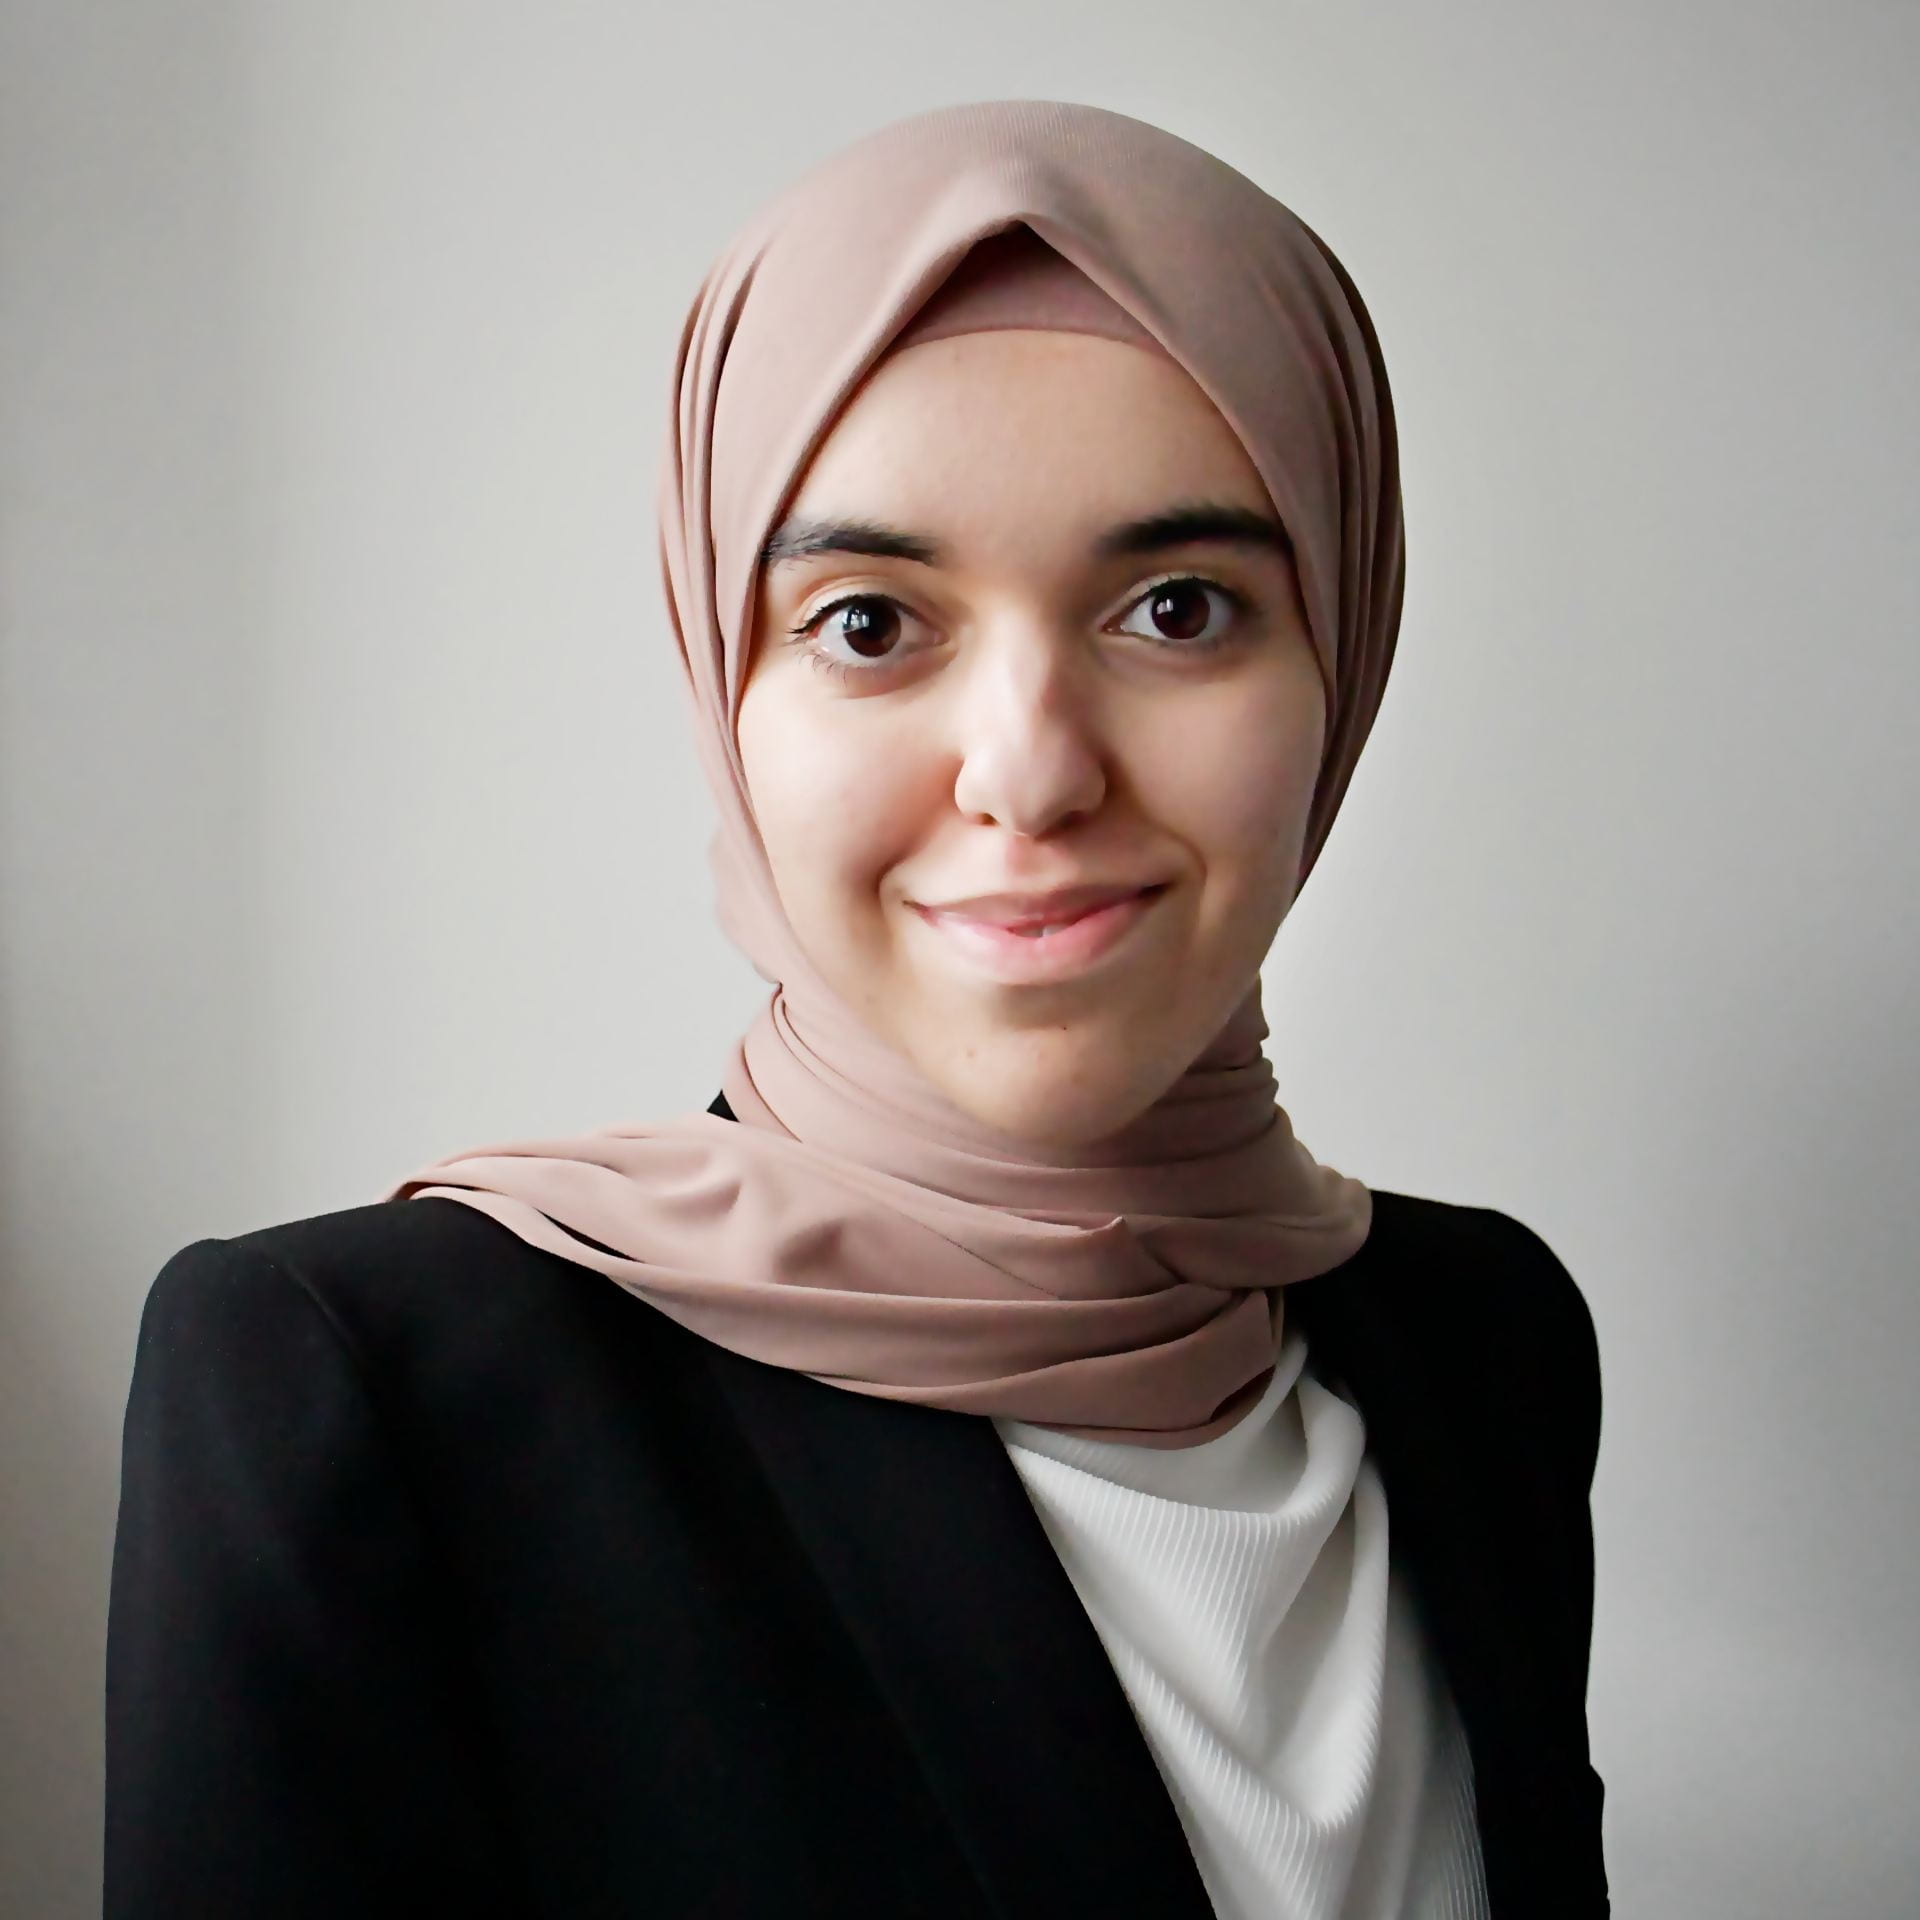 Smiling image of law student, Nafisa El-Turke looking into the camera wearing a smart dark suit jacket, white blouse and pale pink headscarf.